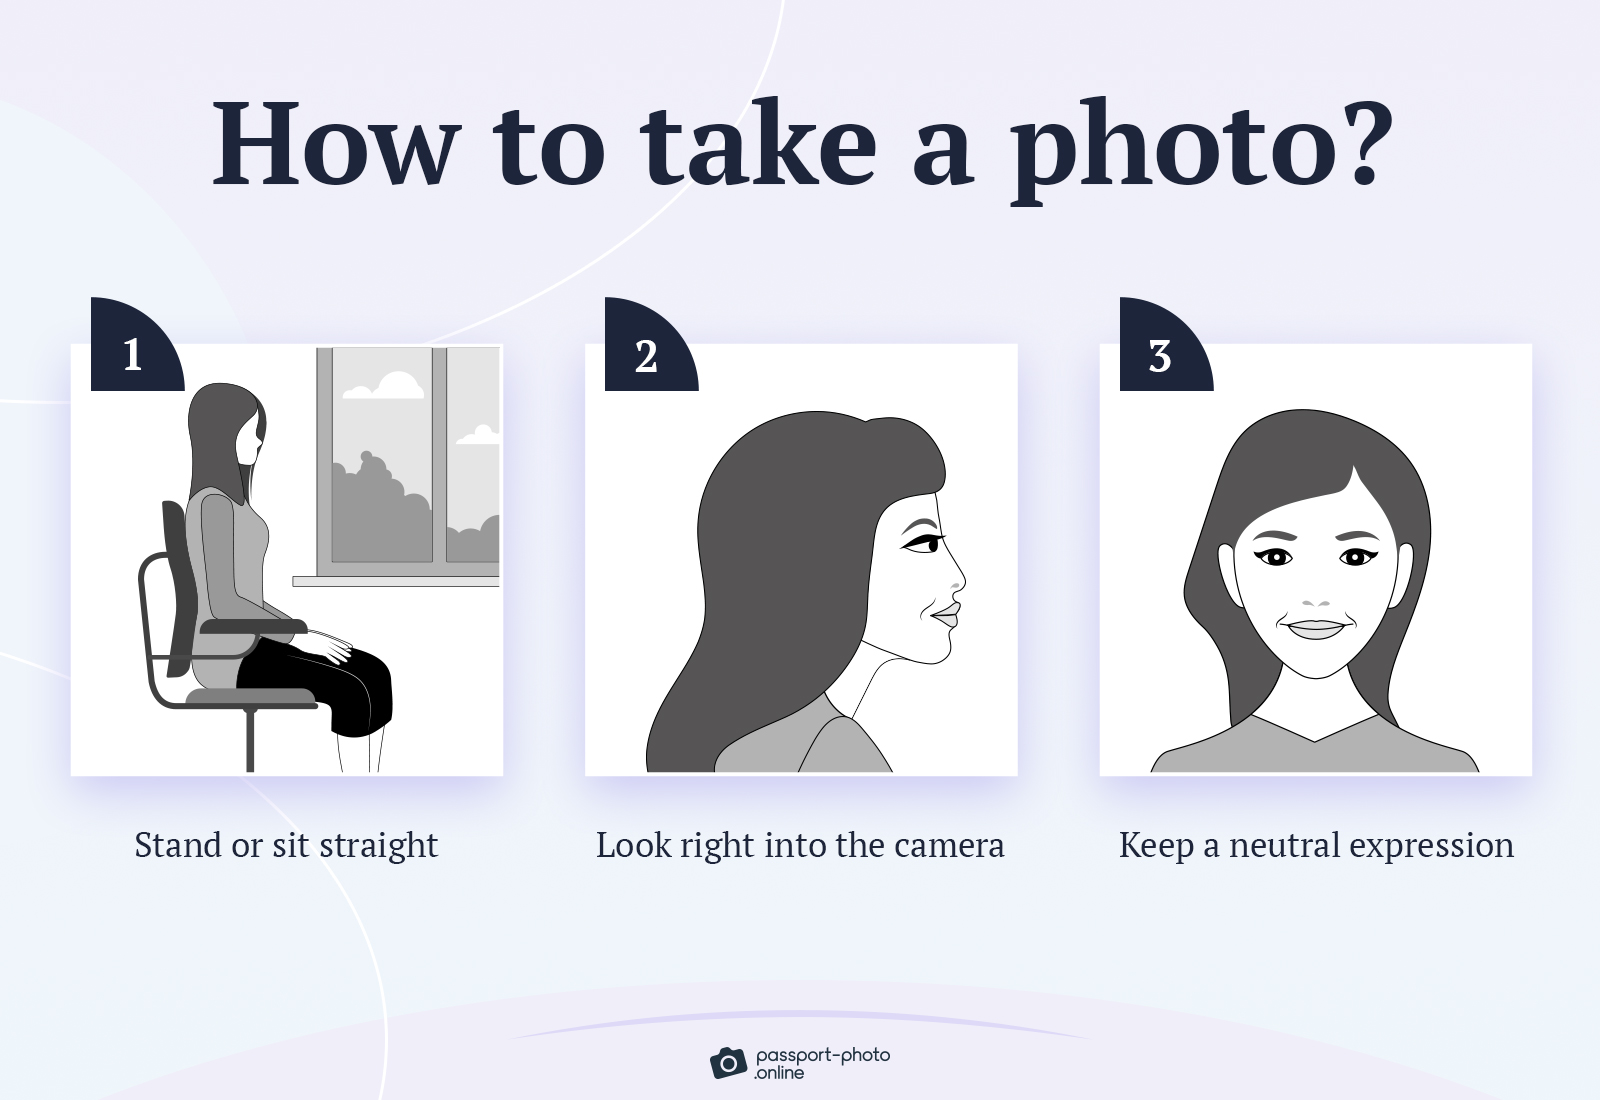 A sequence of steps showing how to pose for a passport photo.